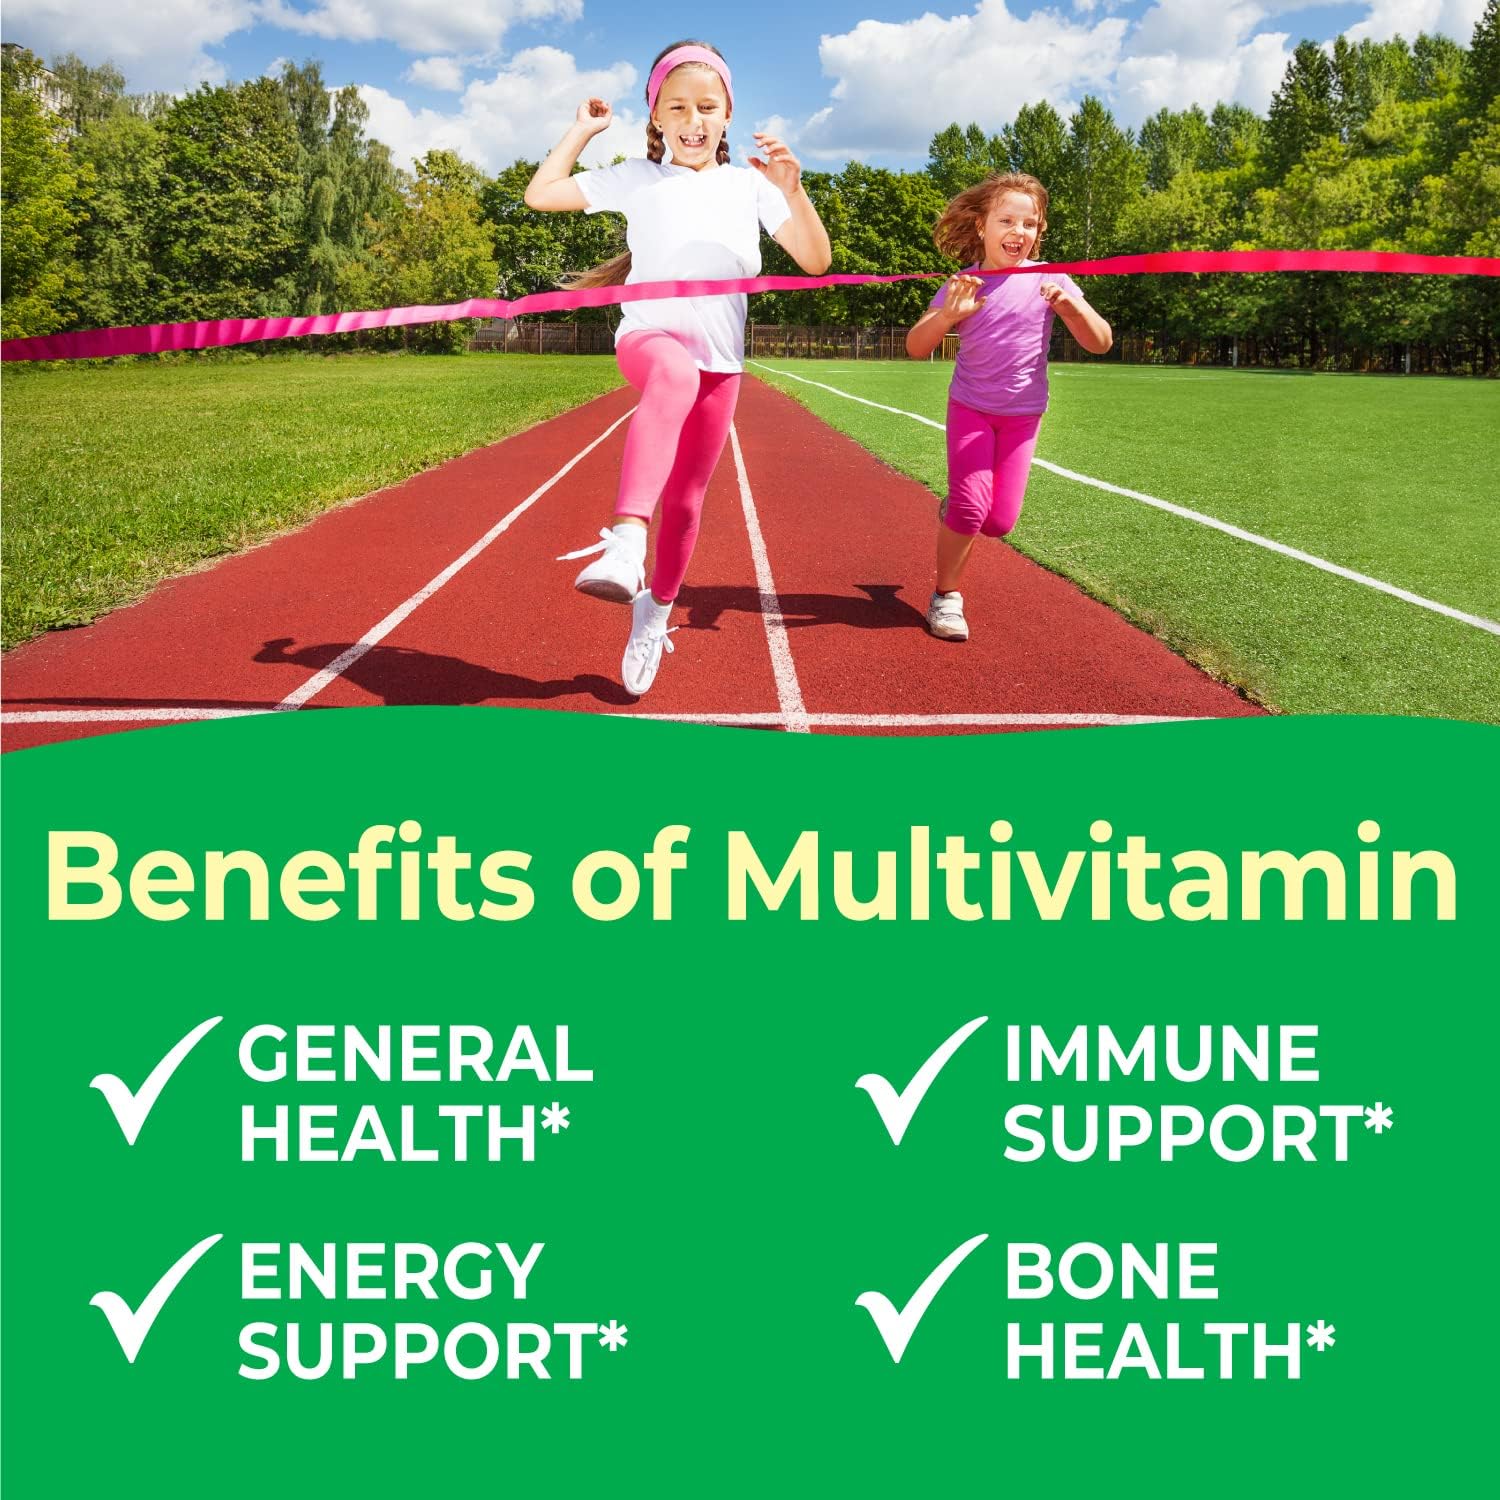 VitaWorks Kids Multivitamin with Iron  Minerals Chewable Tablets - Mixed Fruit Flavor - Vegetarian, GMO-Free, Nut Free - Dietary Supplement - Digestive Support for Children - 120 Chewables,